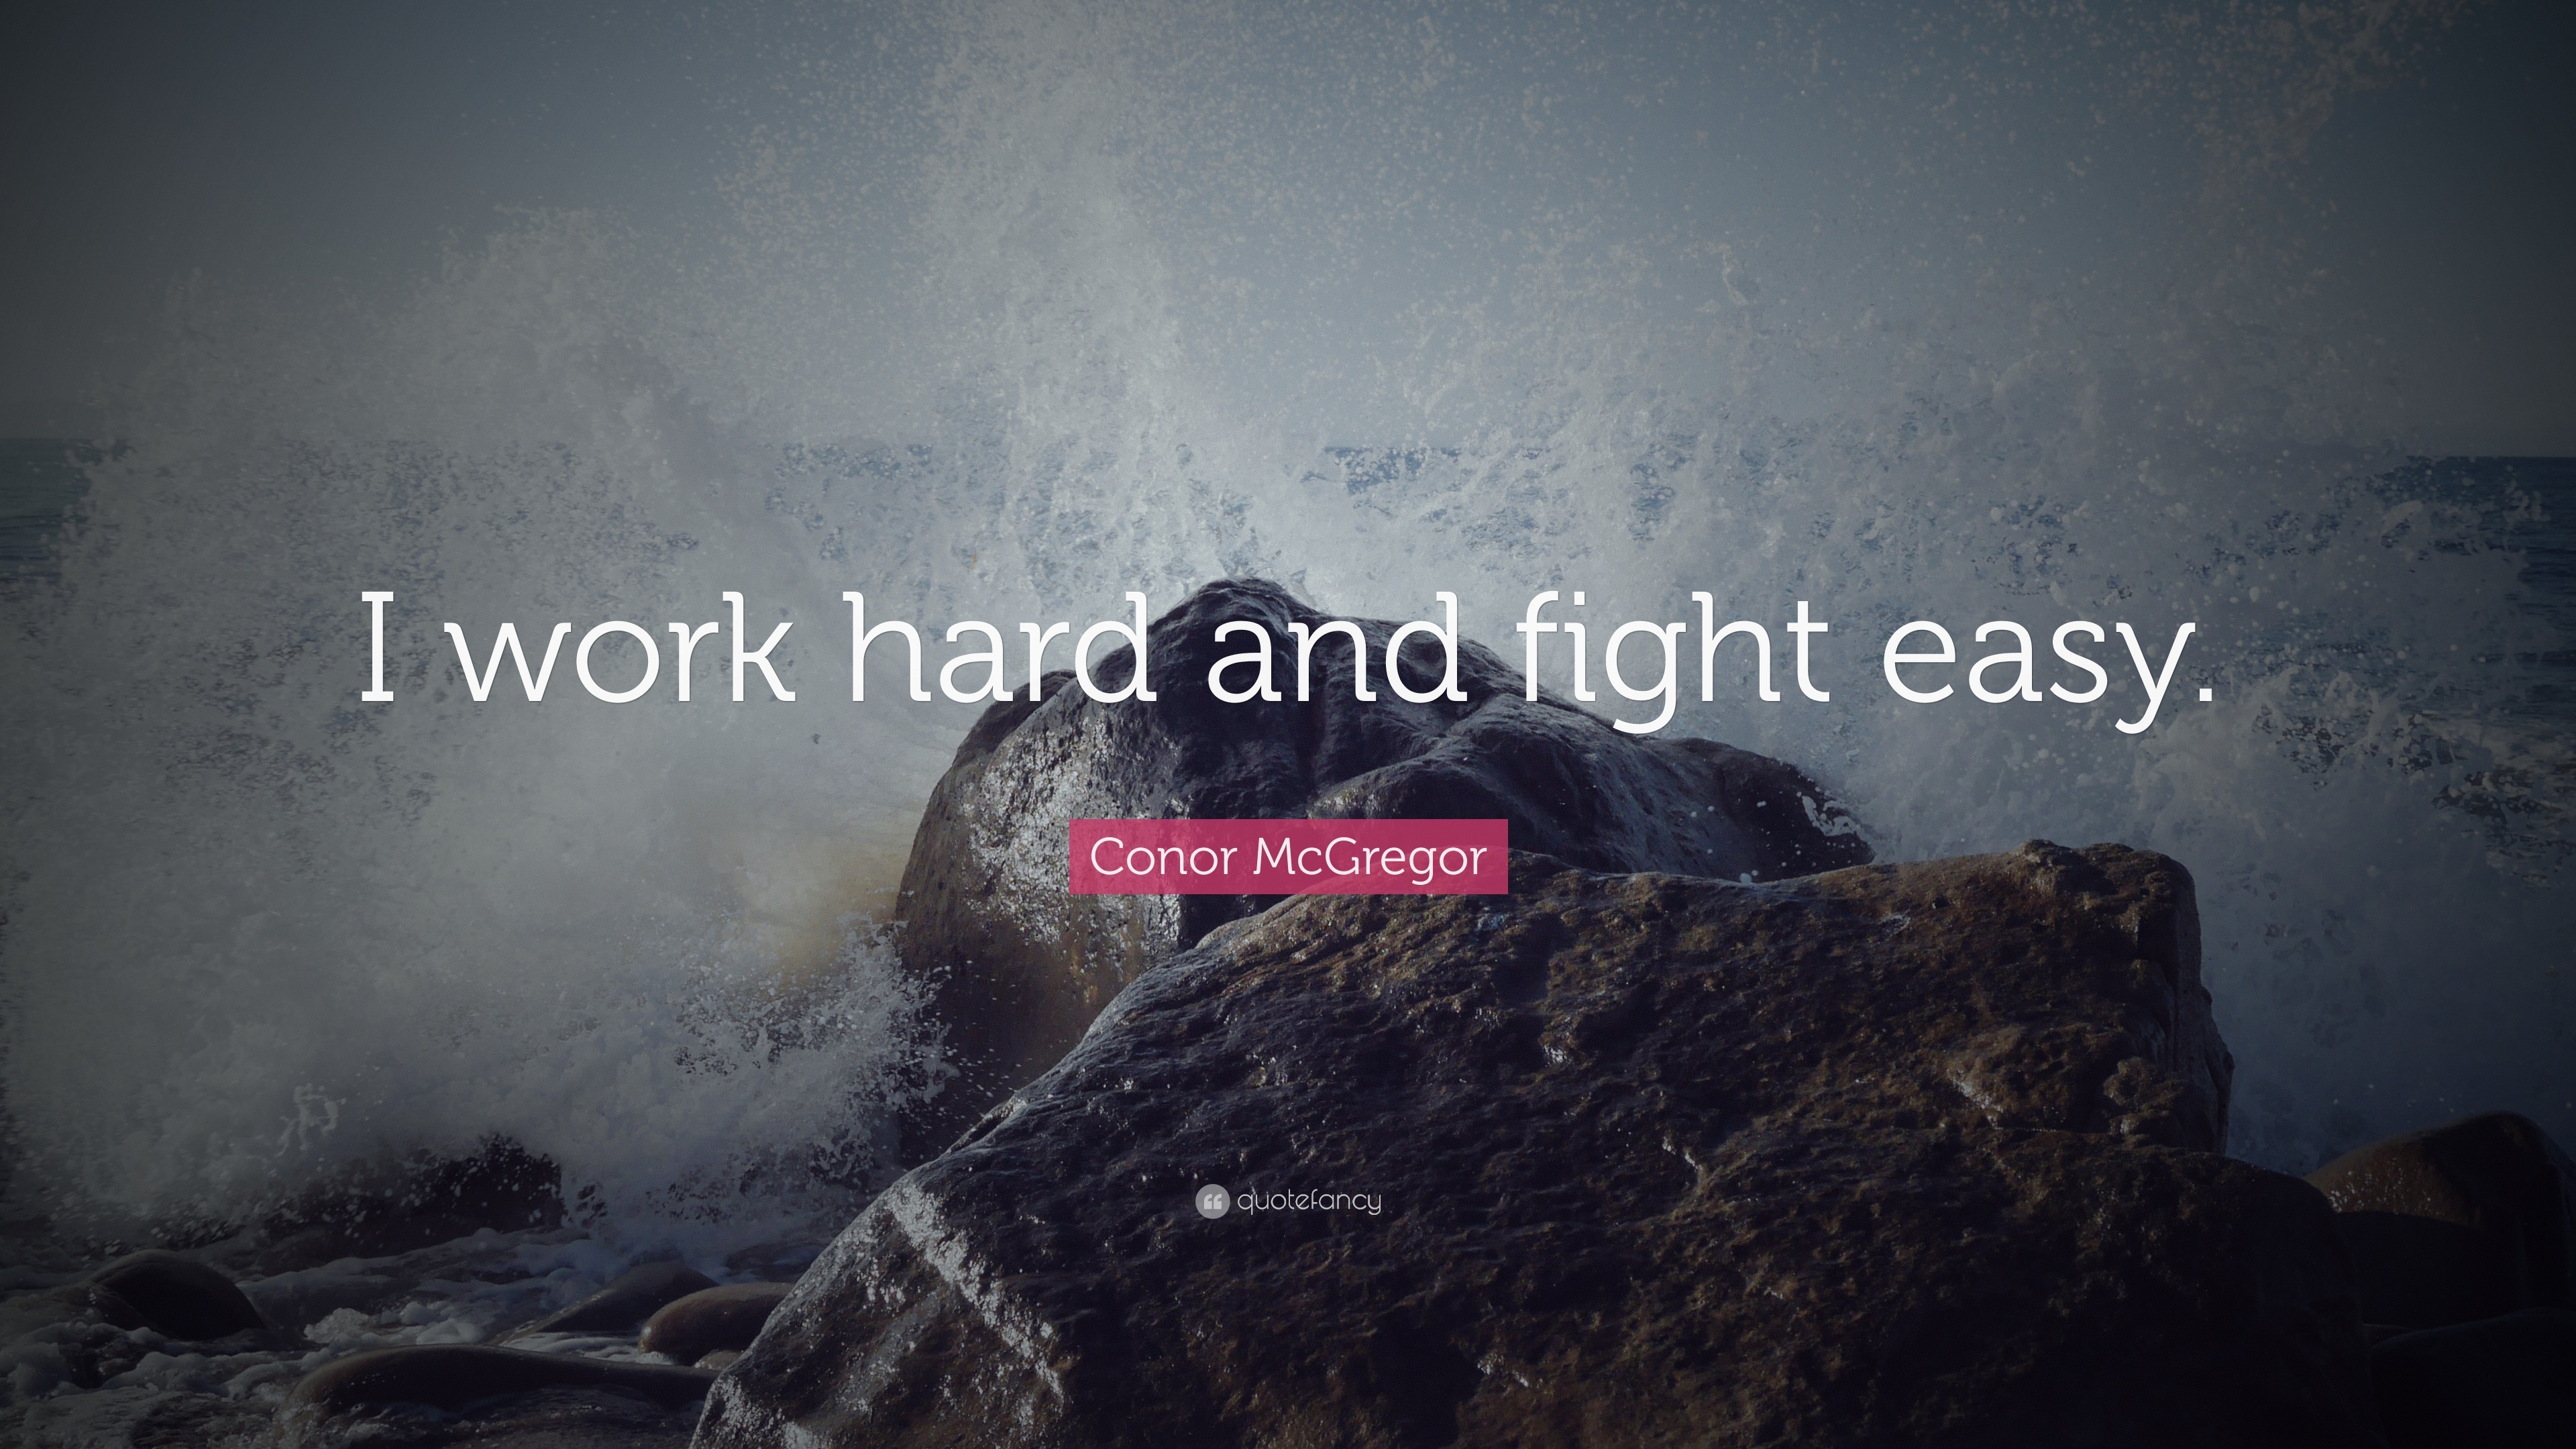 3840x2160 Hard Work Quotes: “I work hard and fight easy.” — Conor McGregor